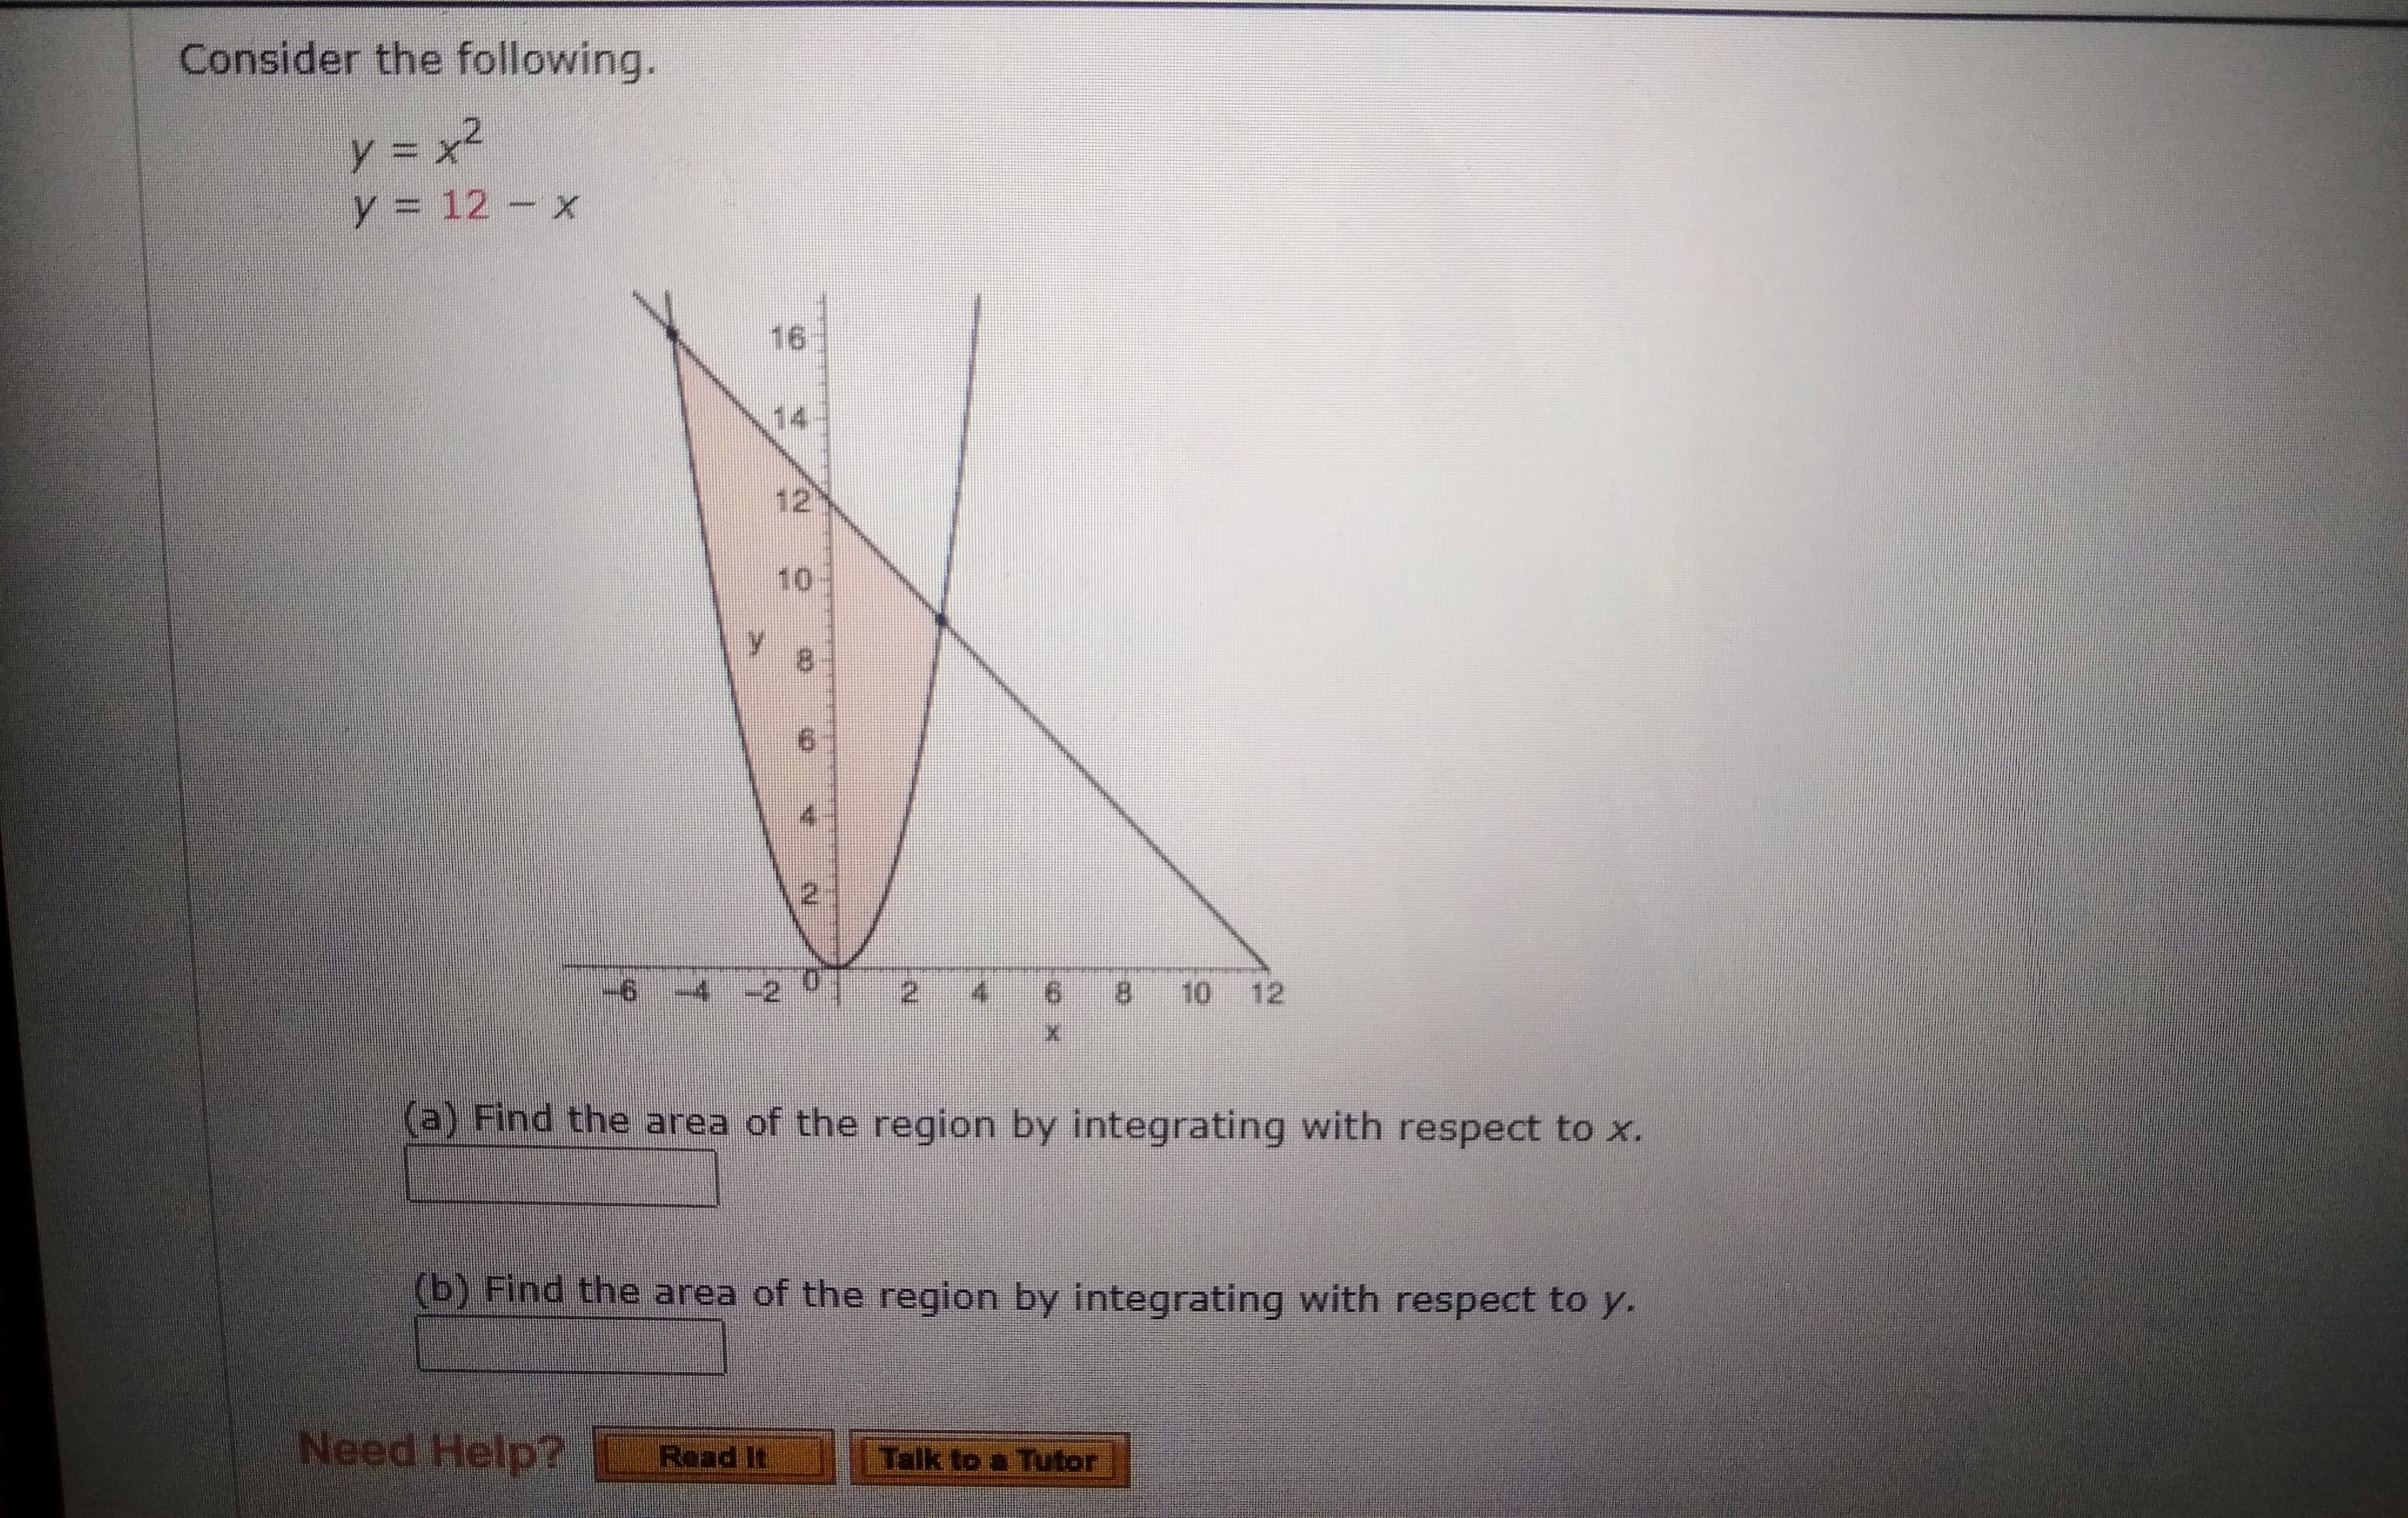 (b) Find the area of the region by integrating with respect to y.
